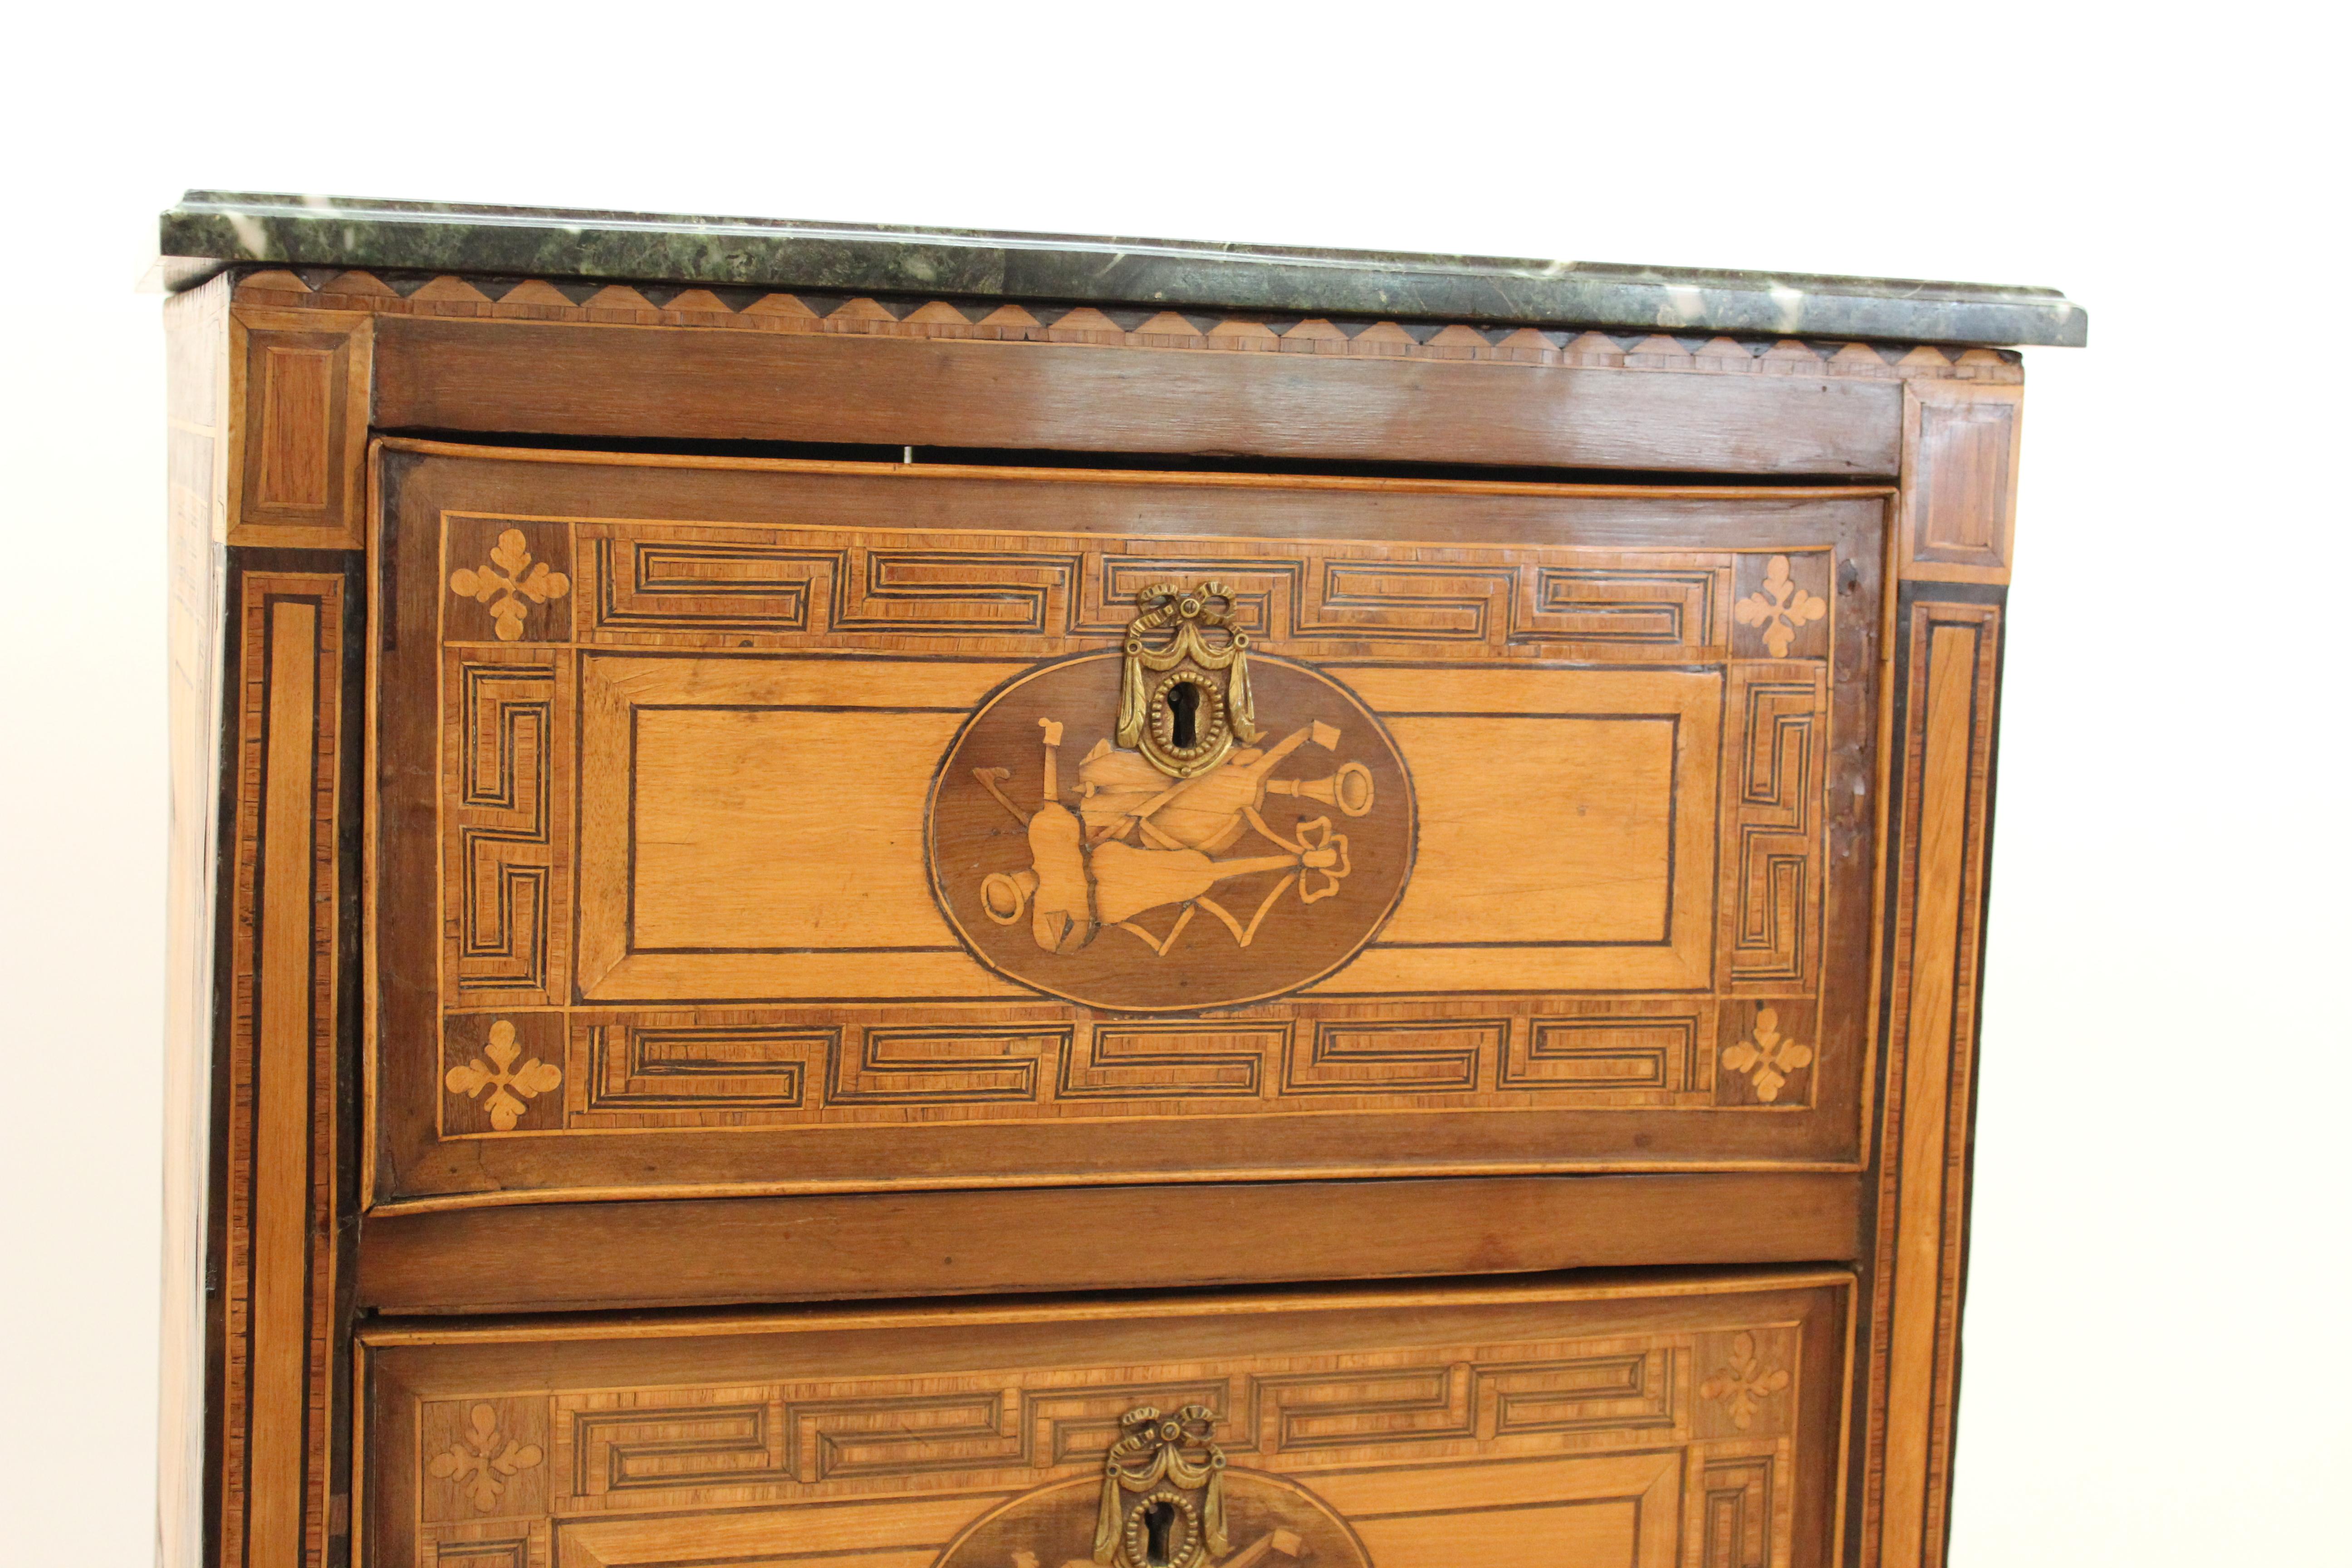 Early 19th Century Italian Neoclassical Inlaid Commodino Cabinet with Marble Top